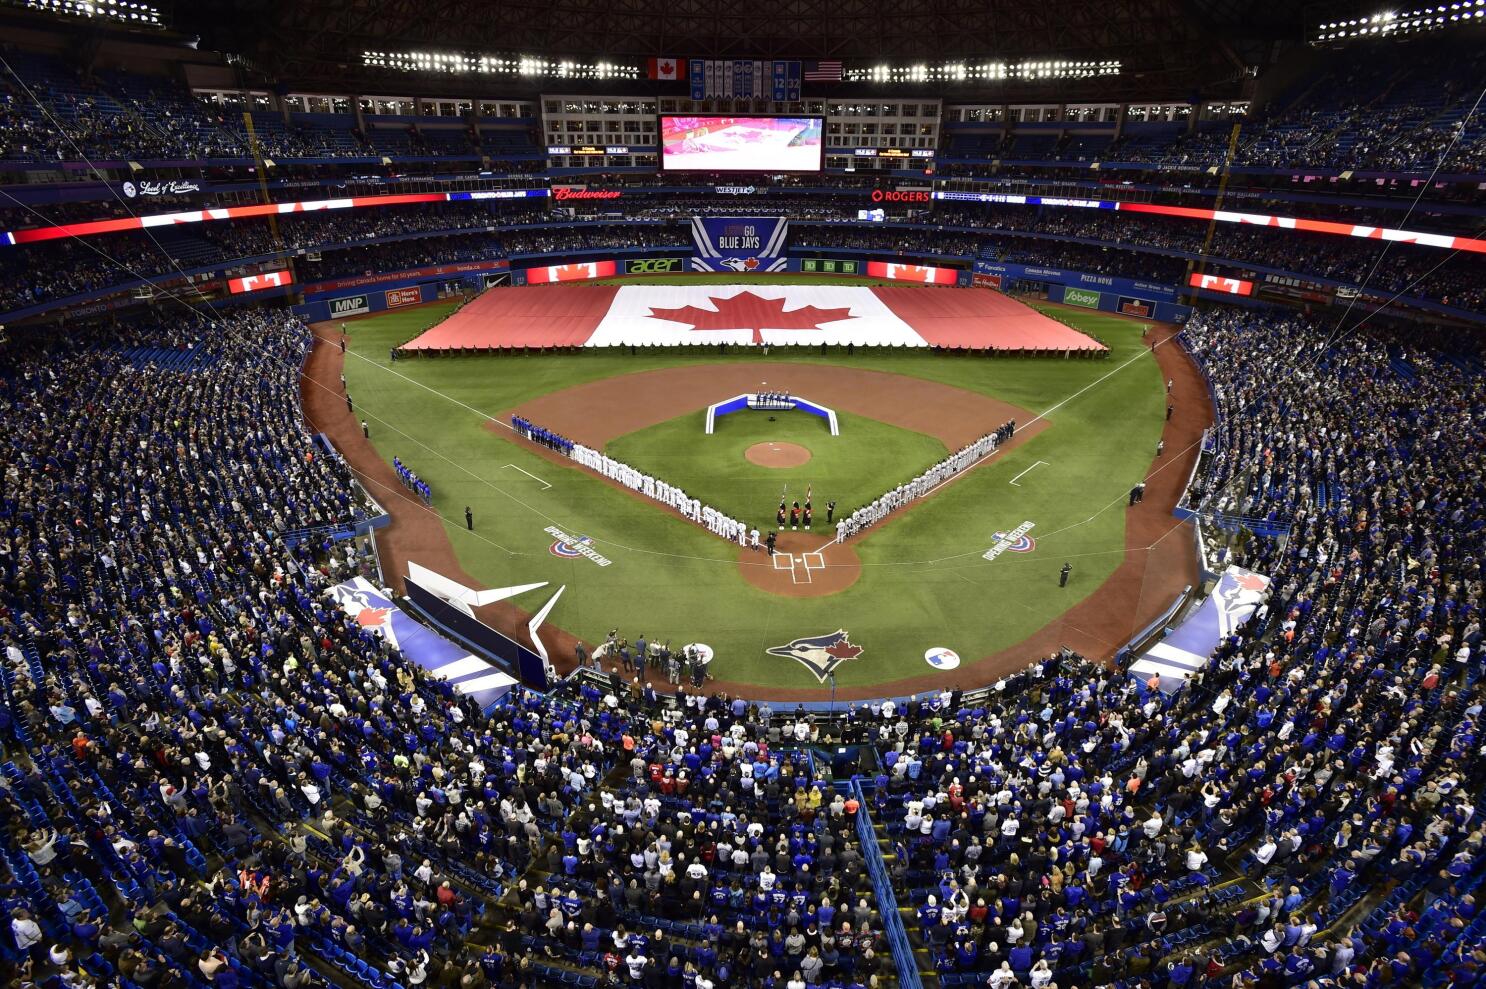 NYS announces COVID-19 guidance for Toronto Blue Jays games at